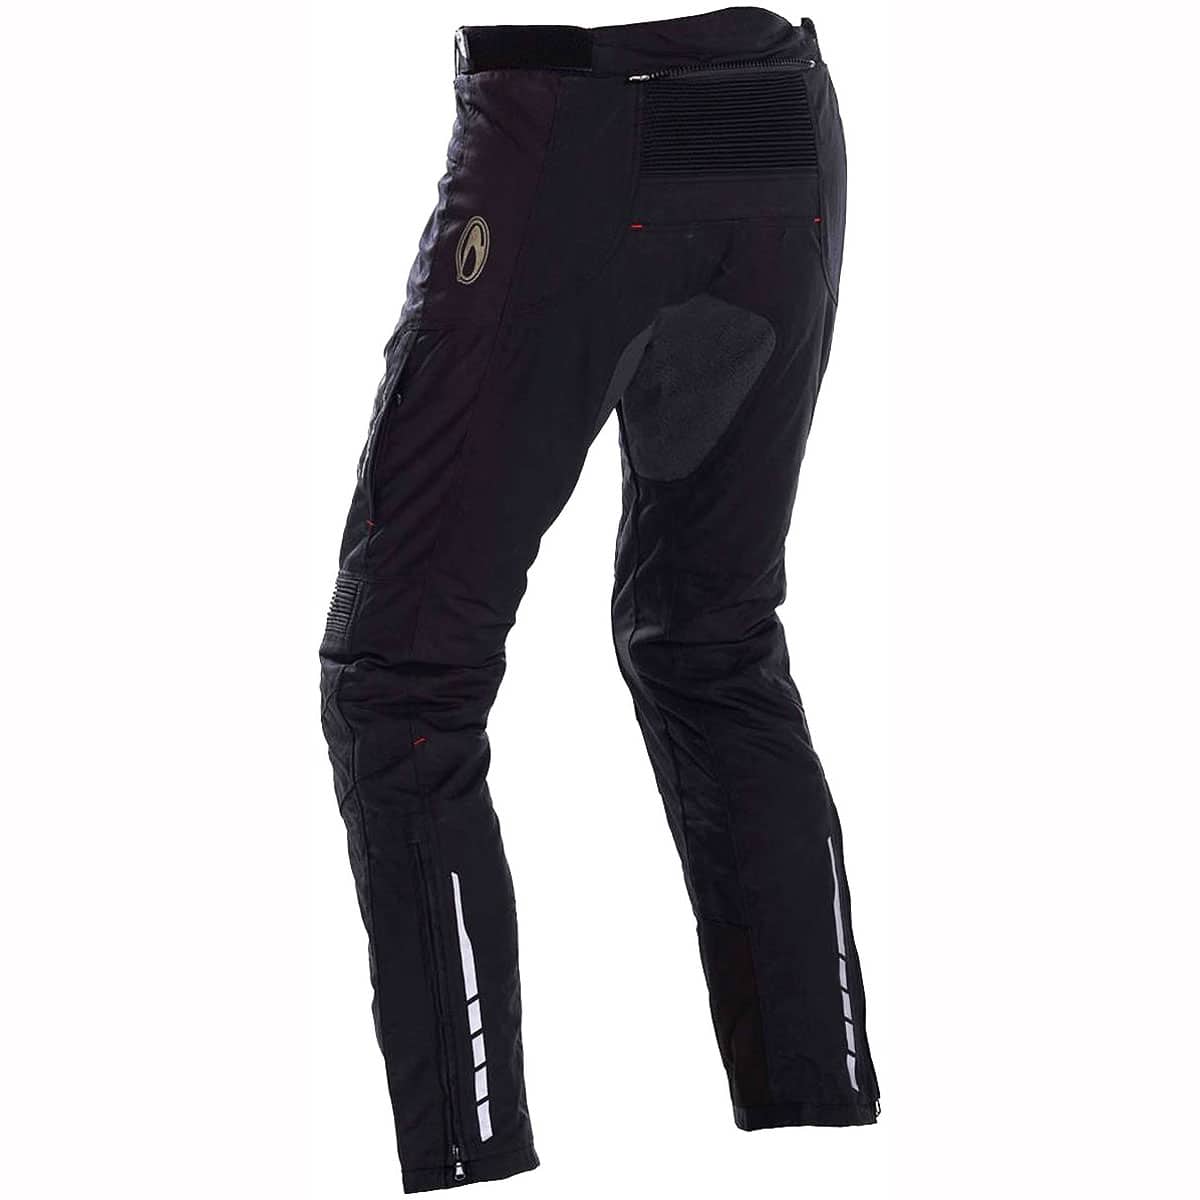 Waterproof ladies textile motorcycle trousers from Richa with D3O armour - back 45deg